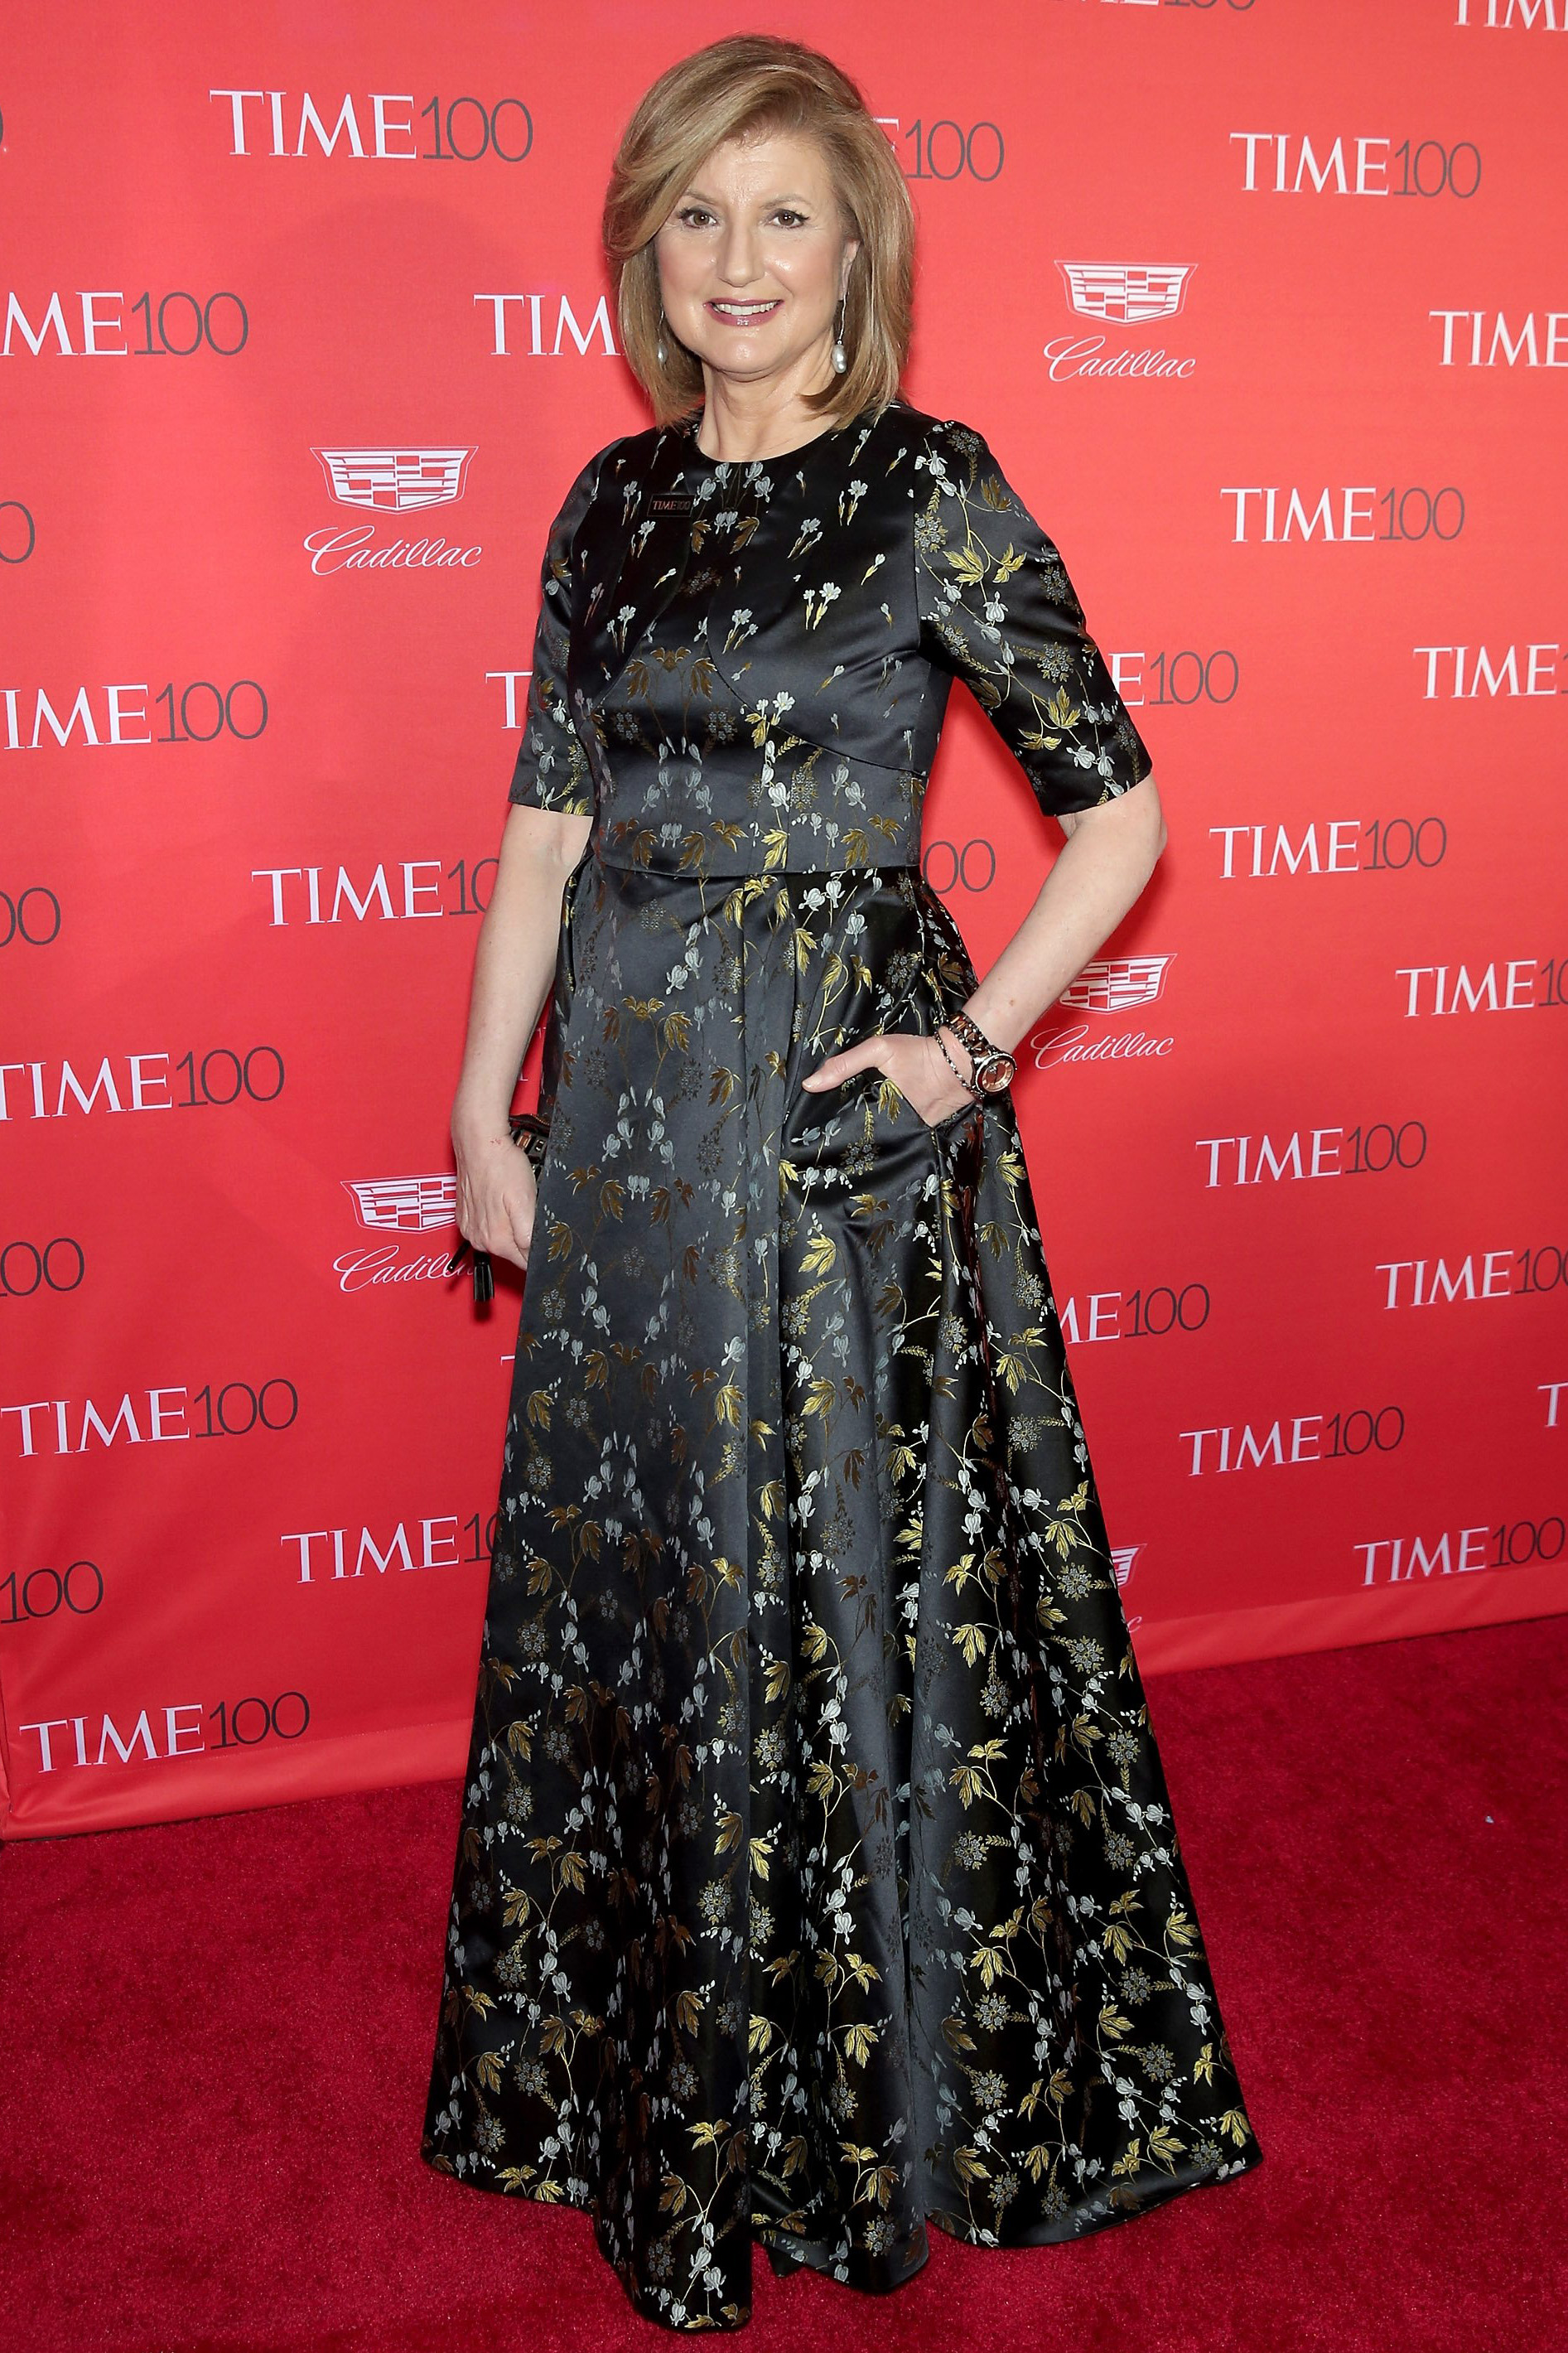 Arianna Huffington at the TIME 100 gala in New York on April 26, 2016.